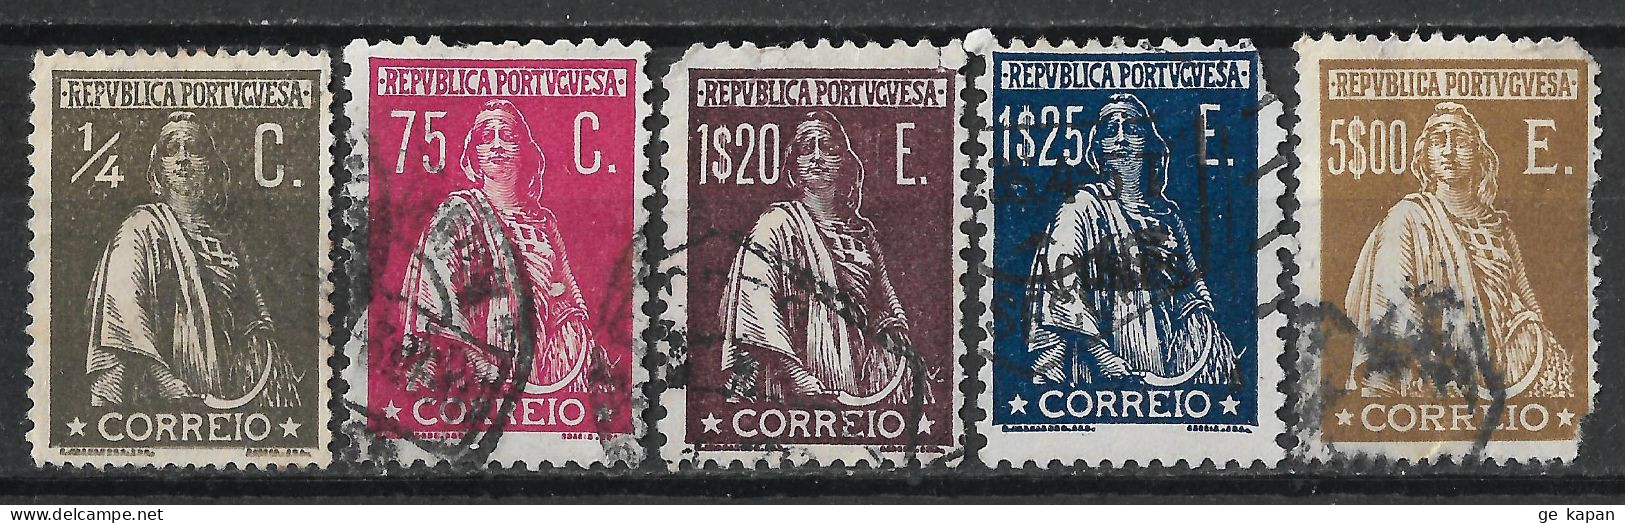 1912-1930 PORTUGAL SET OF 5 USED STAMPS (Michel # 204Ax,428,524,527,528) CV €8.30 - Gebraucht